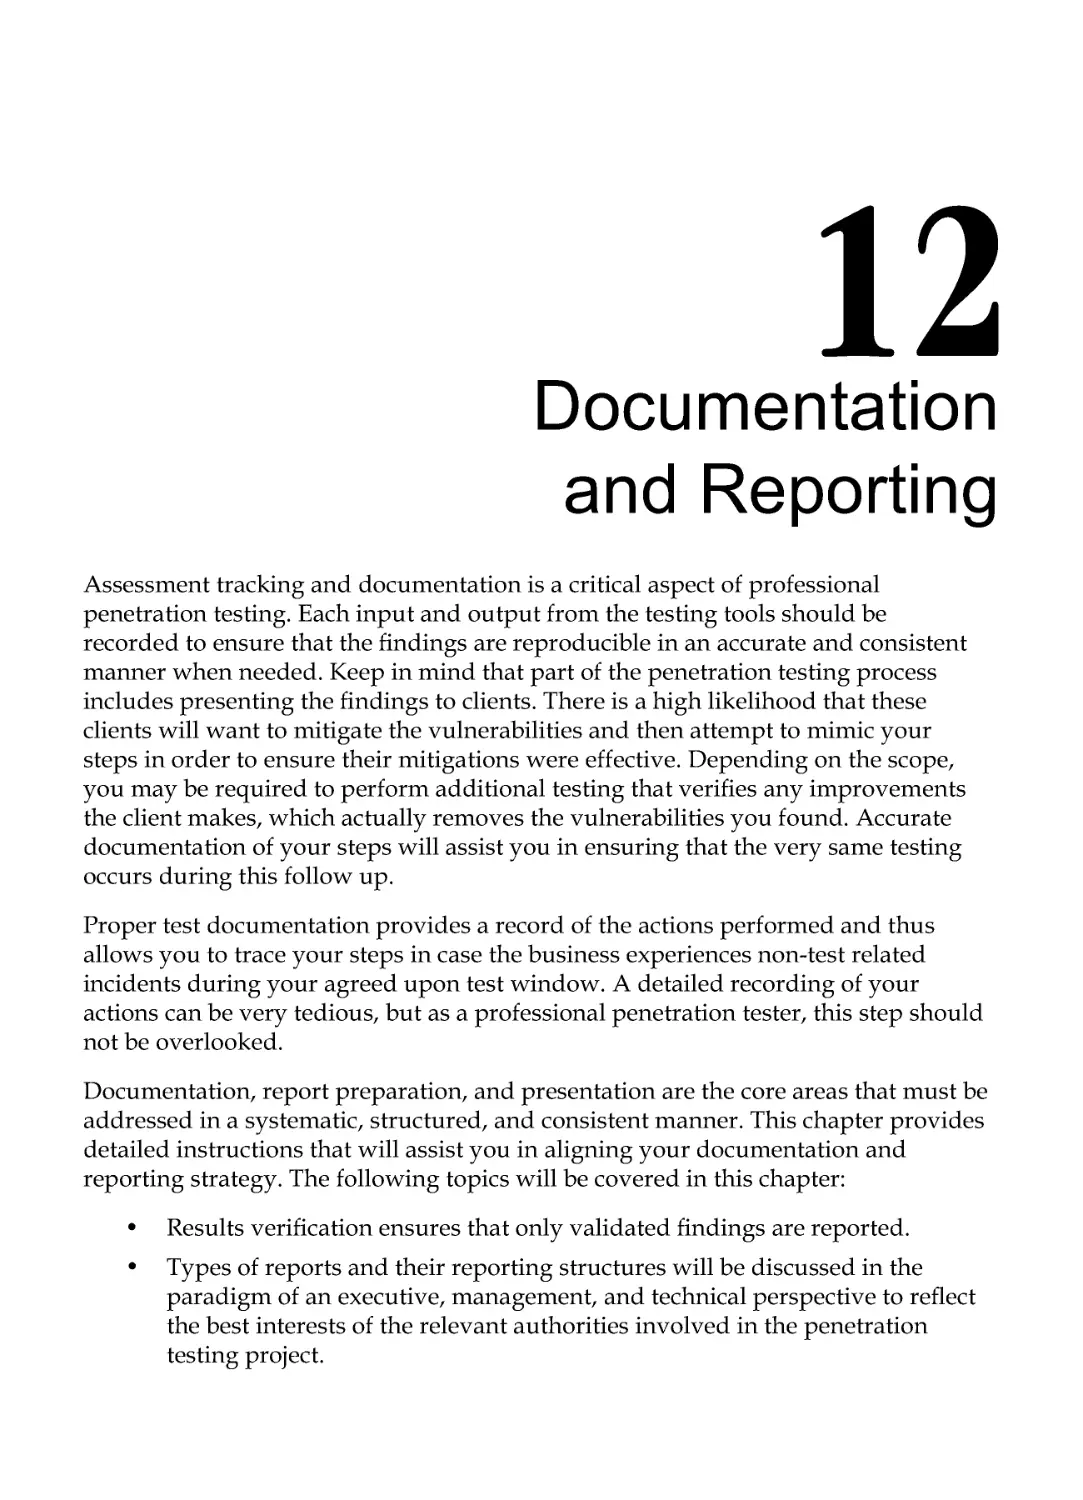 Chapter 12: Documentation 
and Reporting